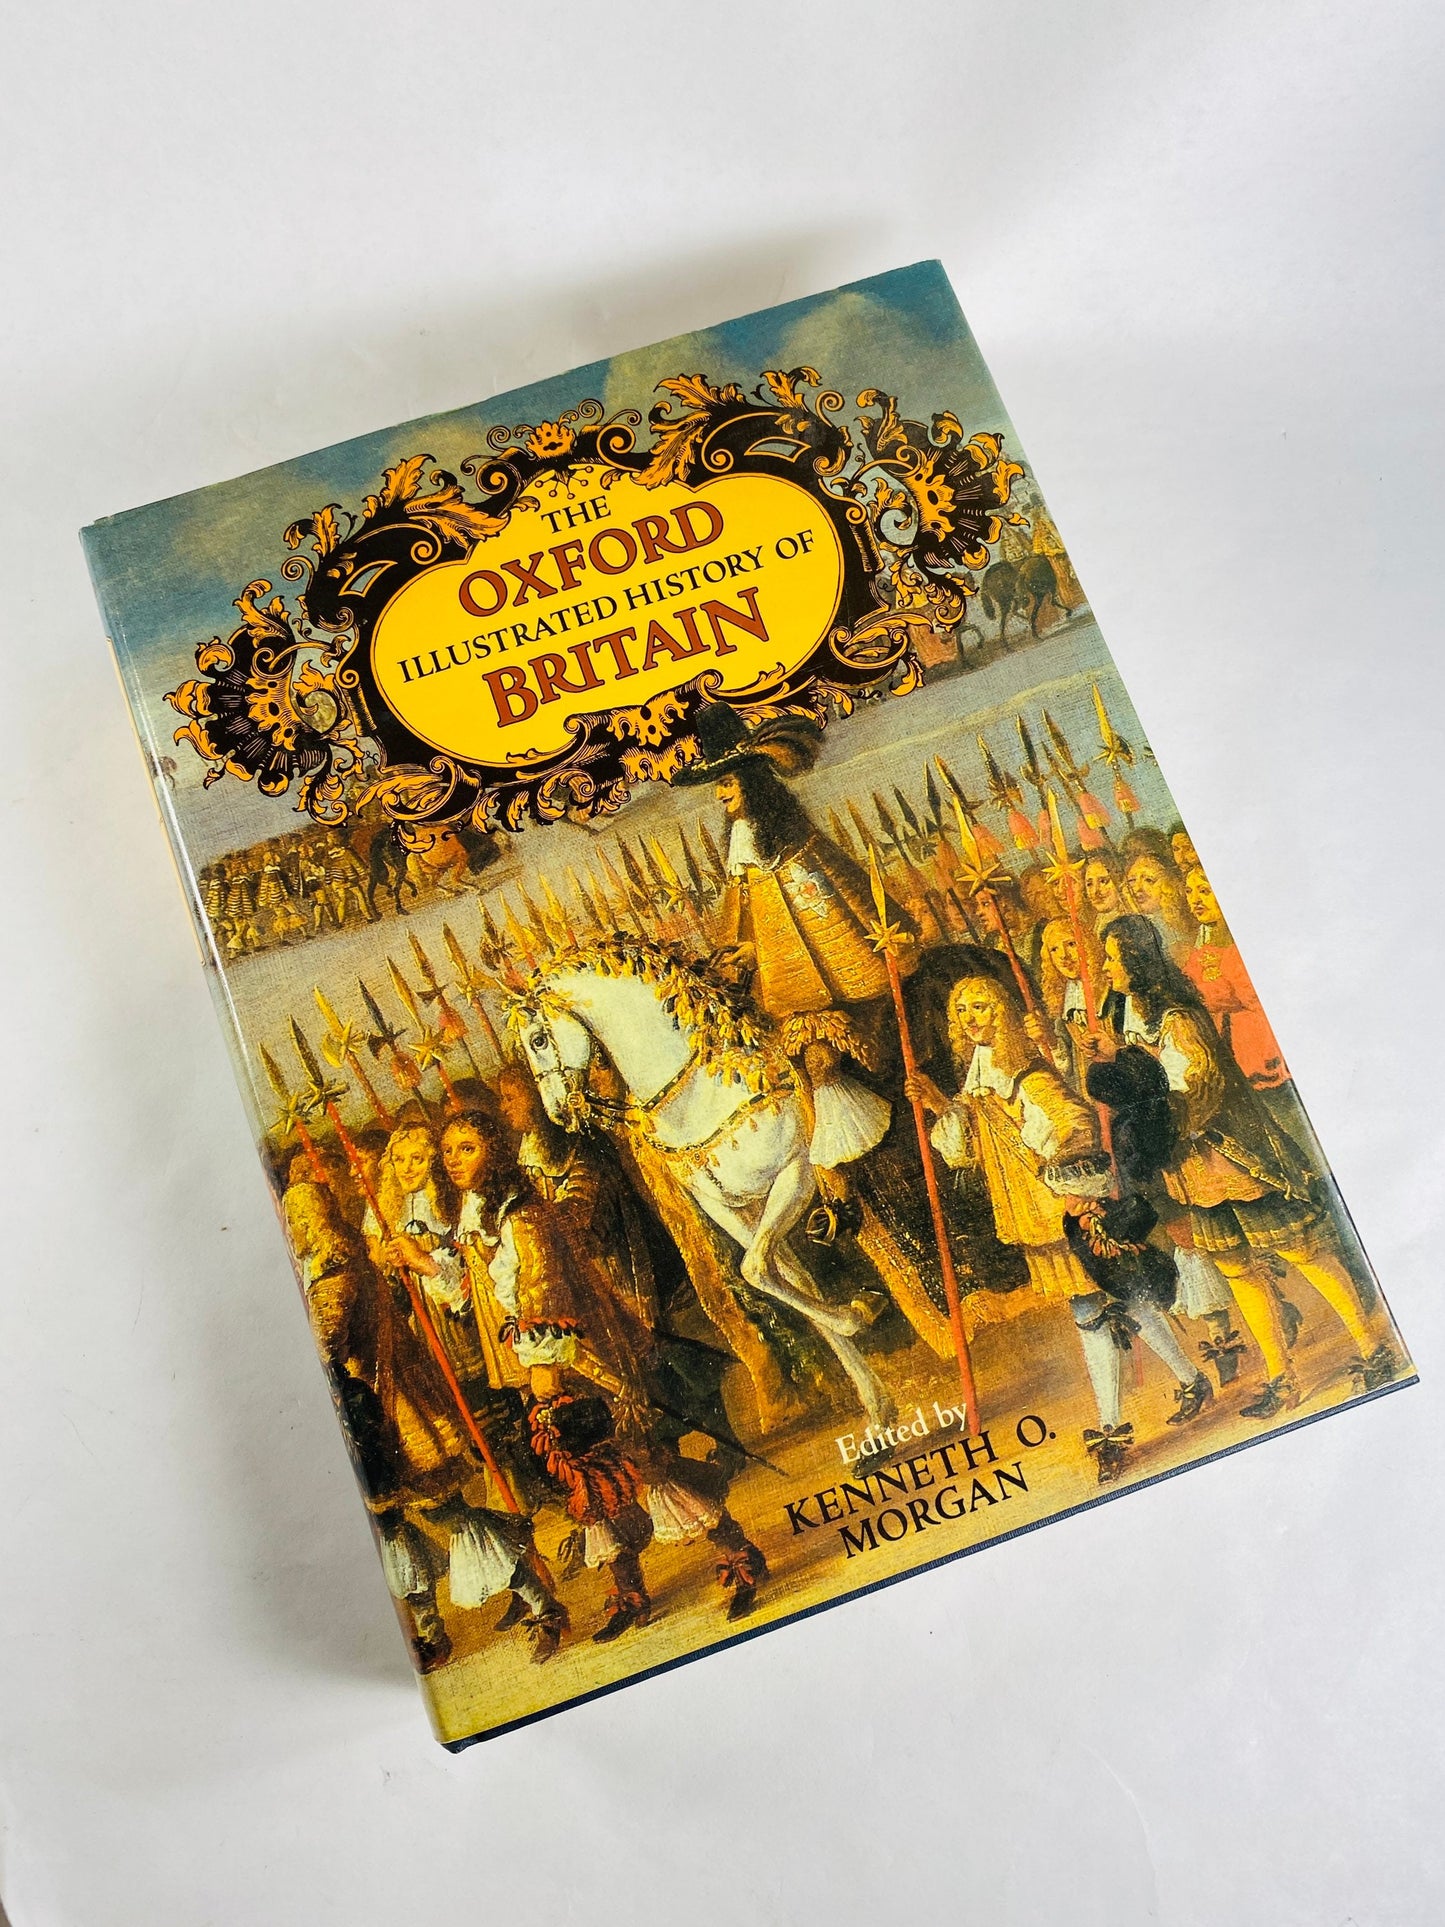 Oxford History of Britain Vintage book EARLY PRINTING circa 1985. 2640 pages with glossy plates and Maps